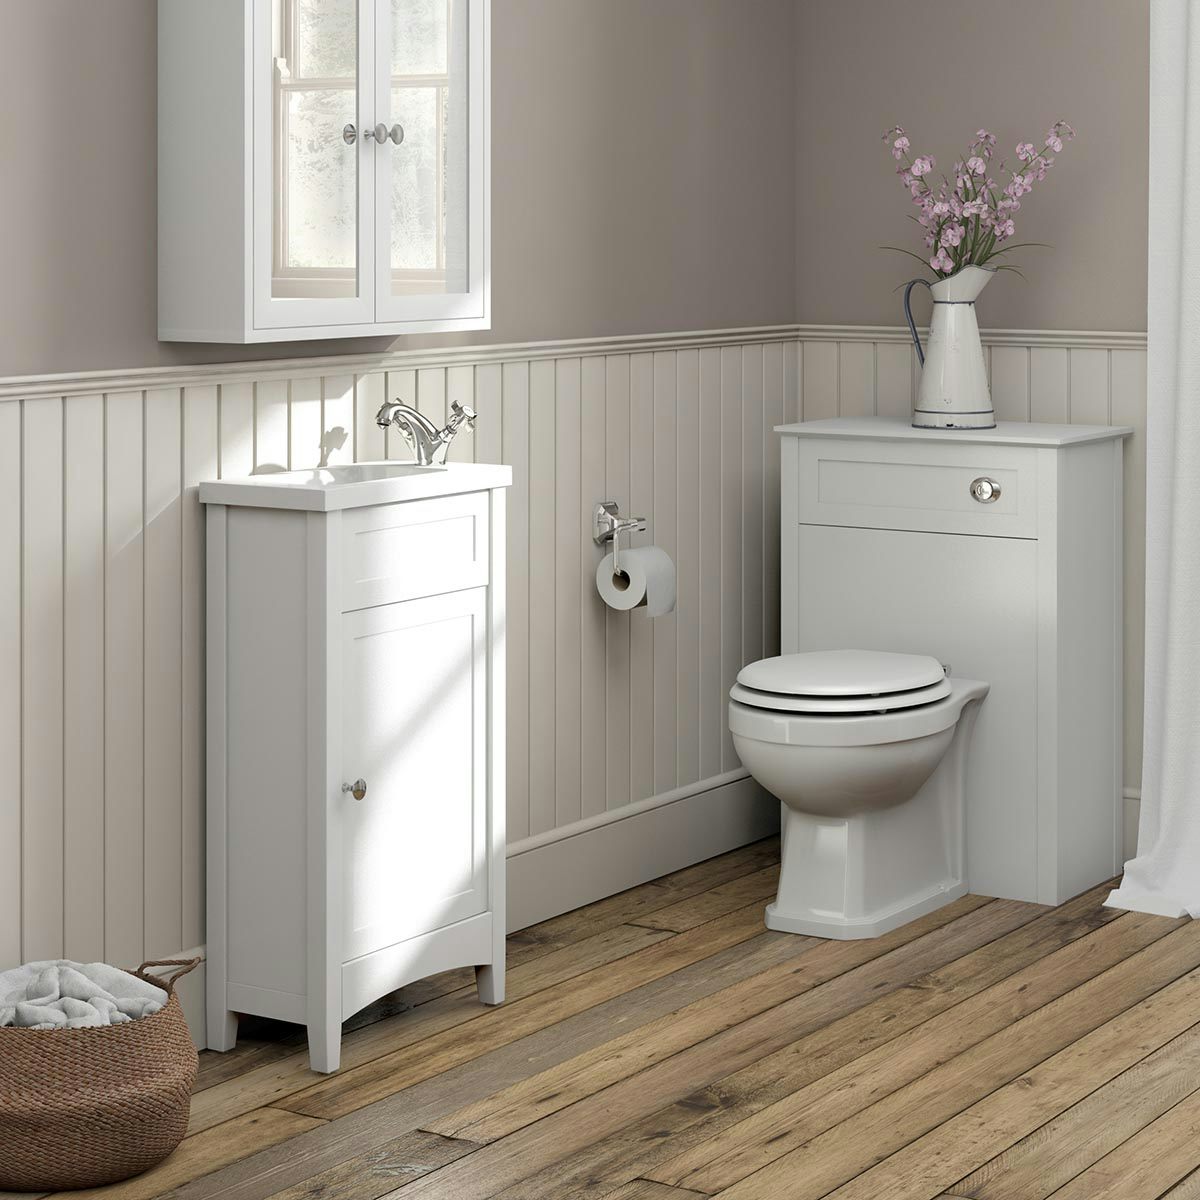 The Bath Co. Camberley white cloakroom furniture suite | VictoriaPlum.com